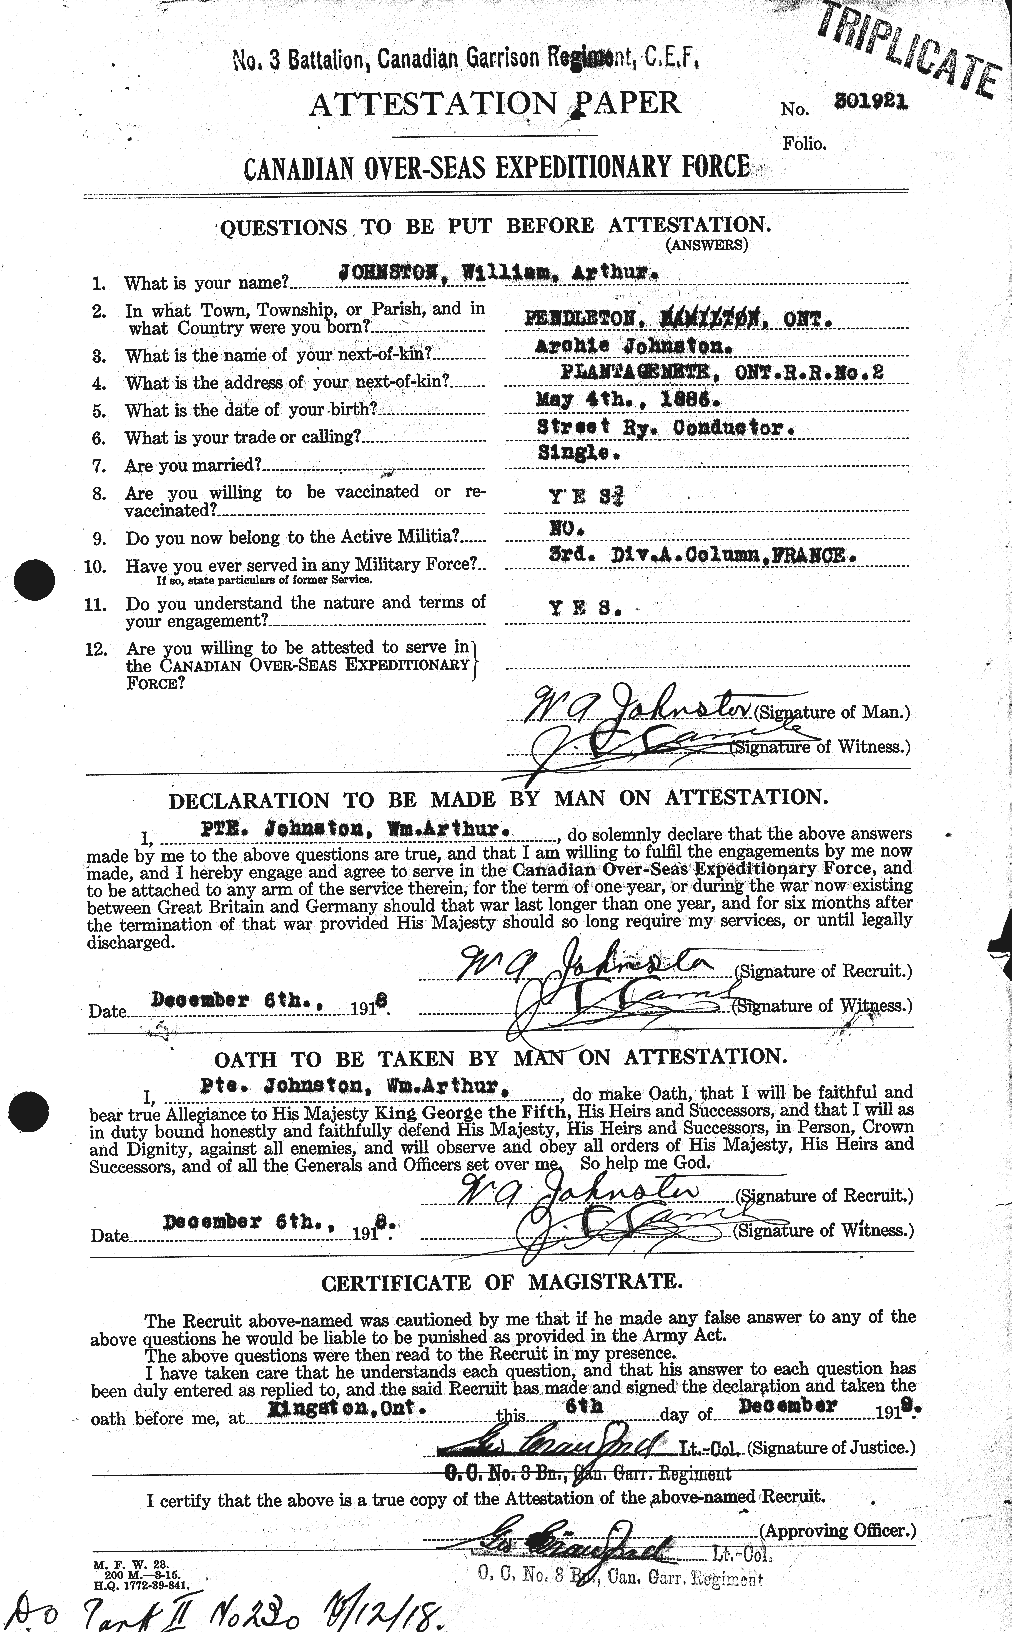 Personnel Records of the First World War - CEF 427299a